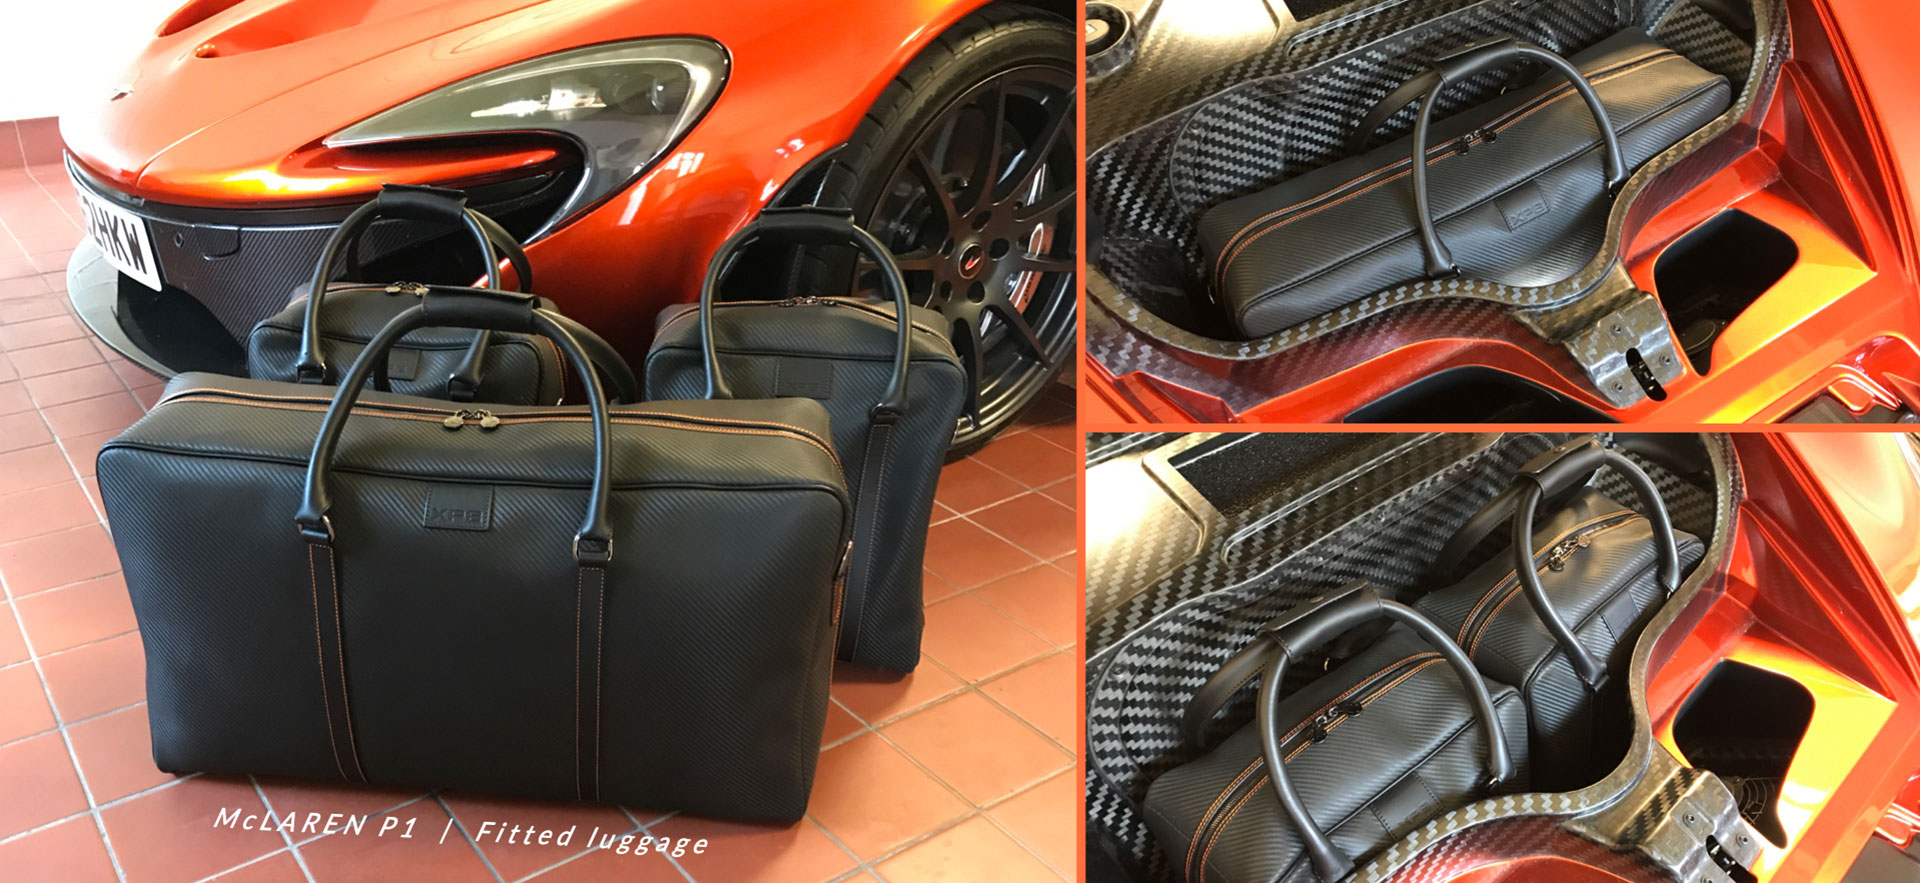 Slide McLaren Fitted Luggage